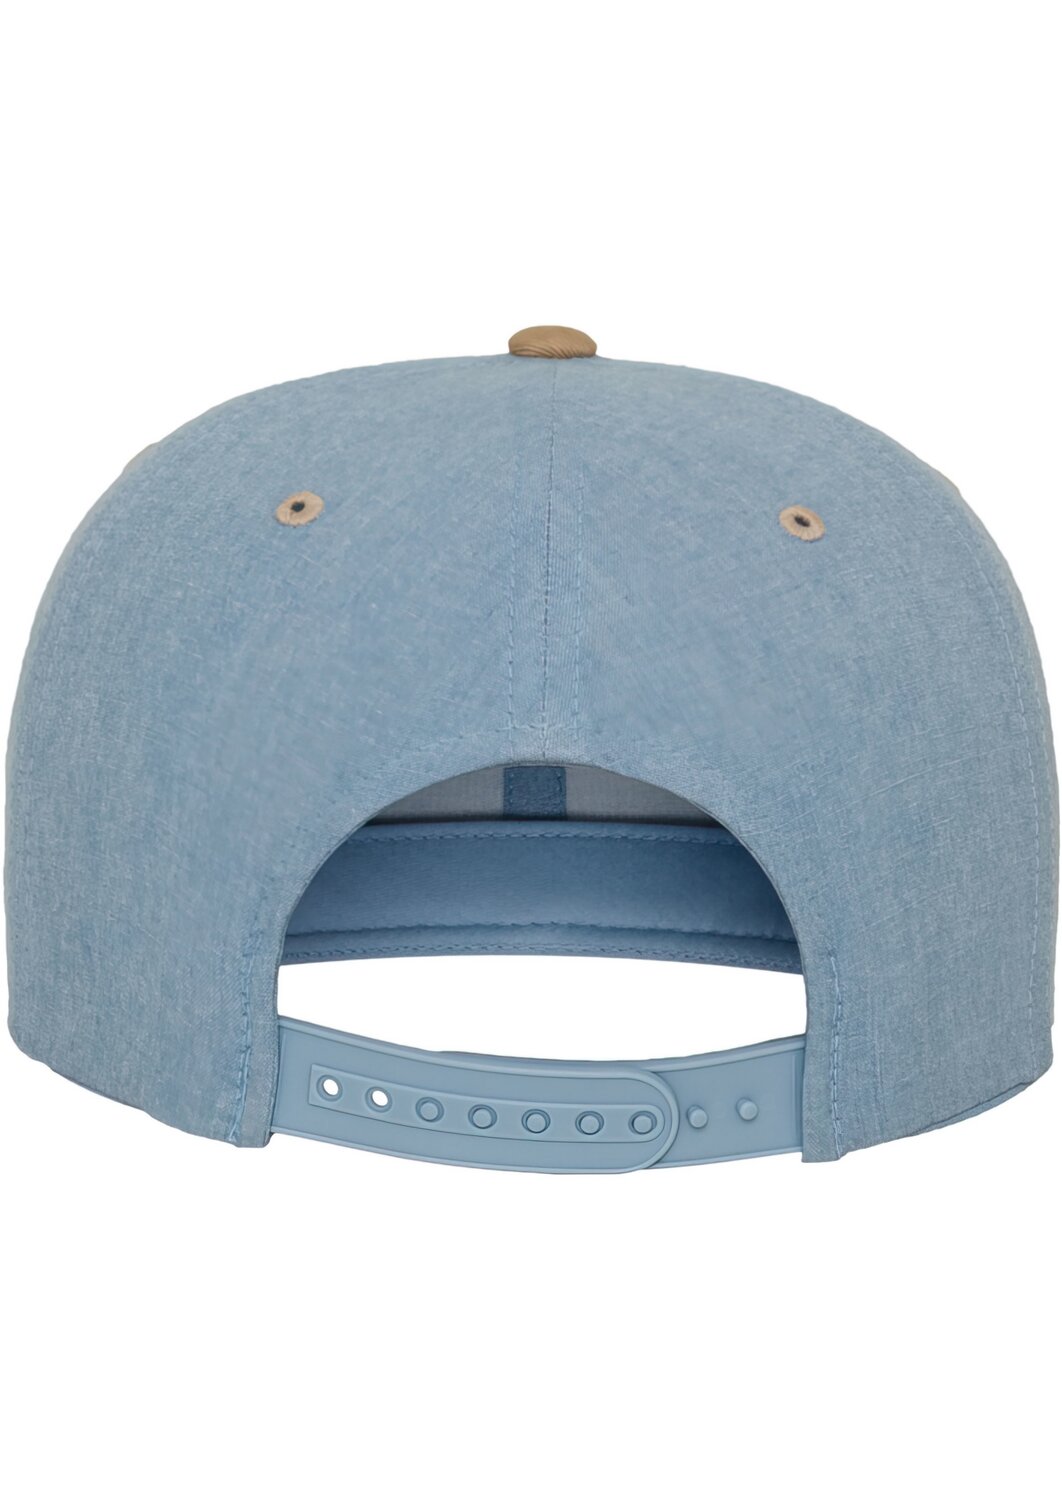 Snapback Cap Chambray-Suede Flexfit blue/beige MAXISCOOT 